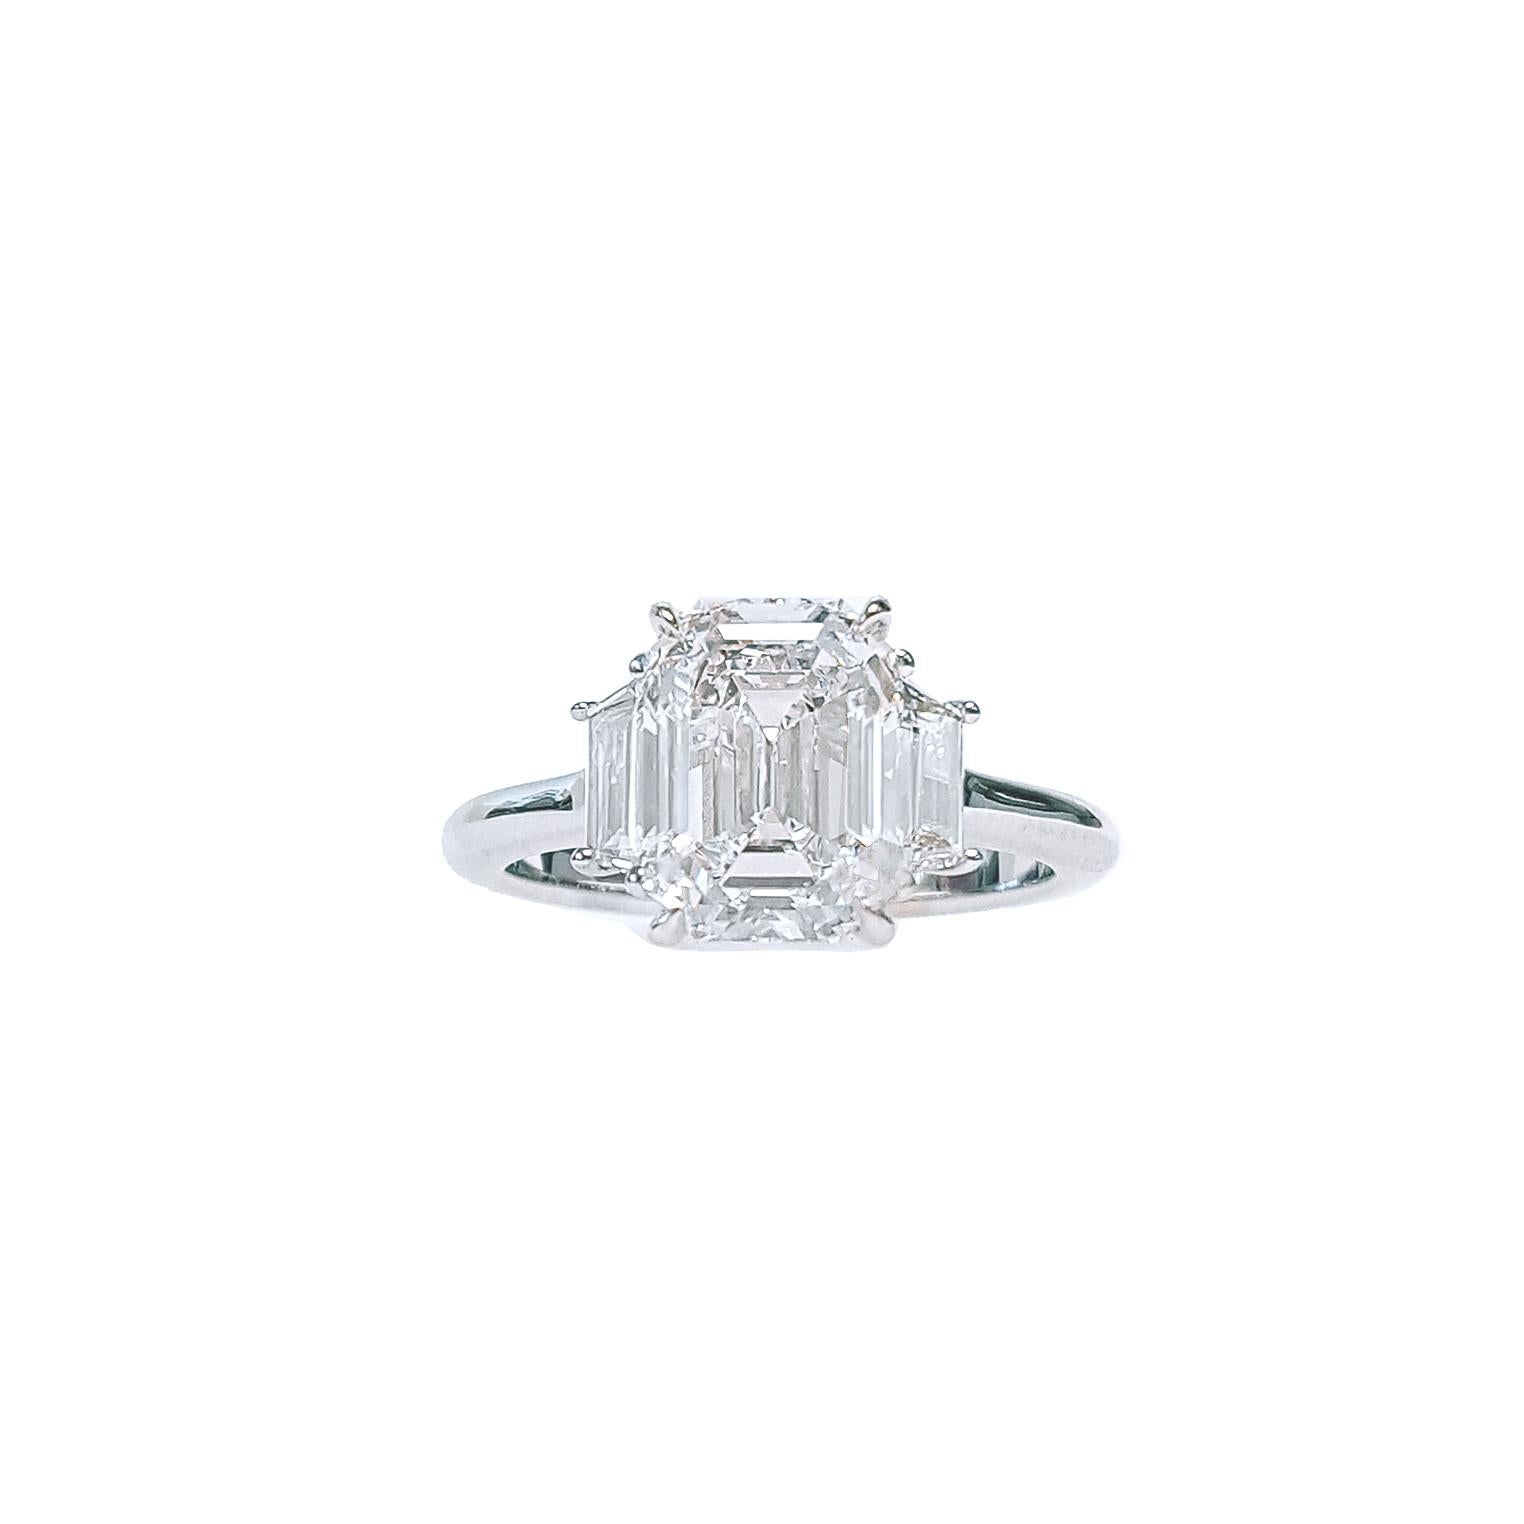 Emerald Cut 3 Carat, D Color Emerald-Cut Diamond Three-Stone Engagement Ring, GIA Certified. For Sale